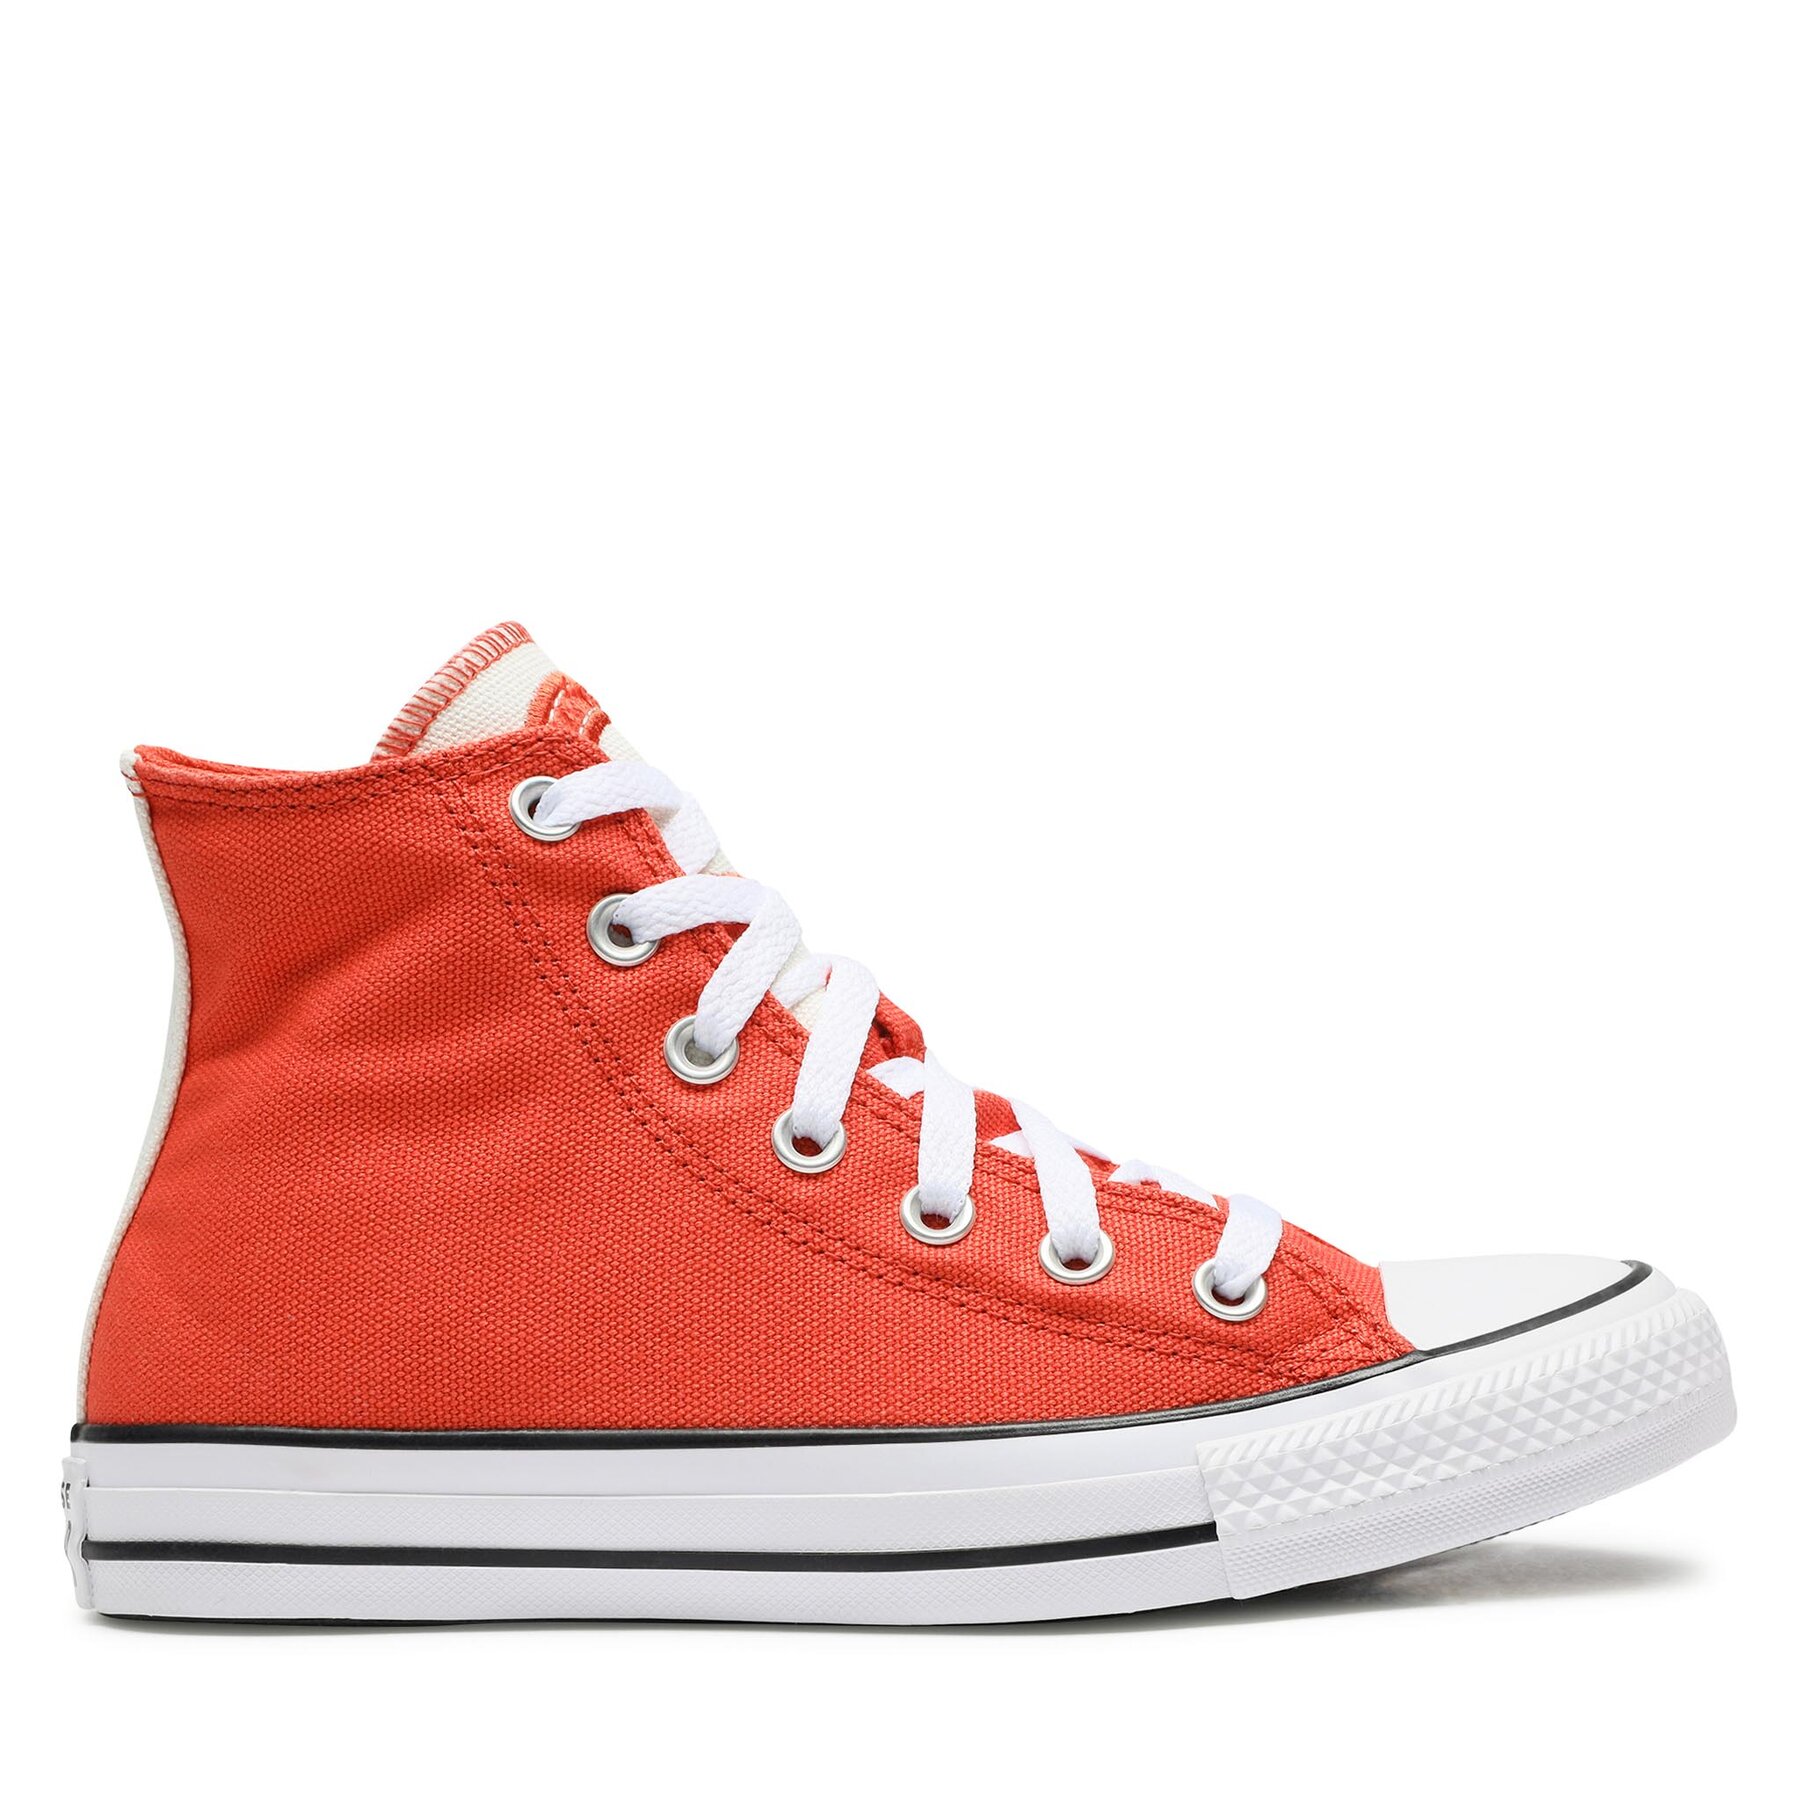 Sneakers aus Stoff Converse Chuck Taylor All Star A06197C Rust von Converse